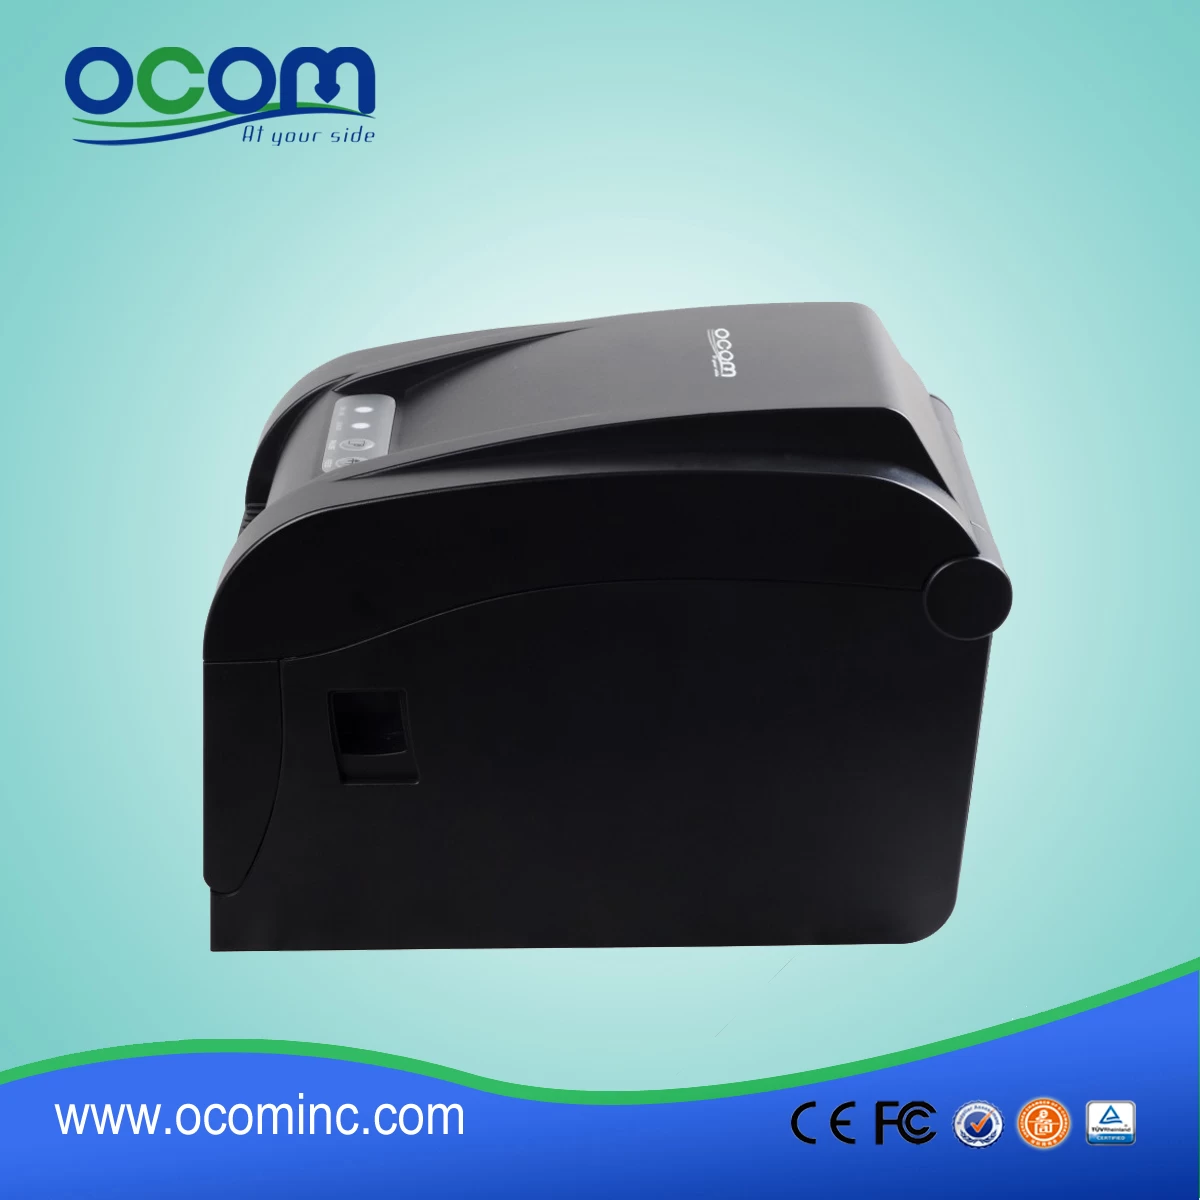 (OCBP-005) 3 Inch Direct Thermal Barcode Label Printer support thermal roll paper and adhesive paper